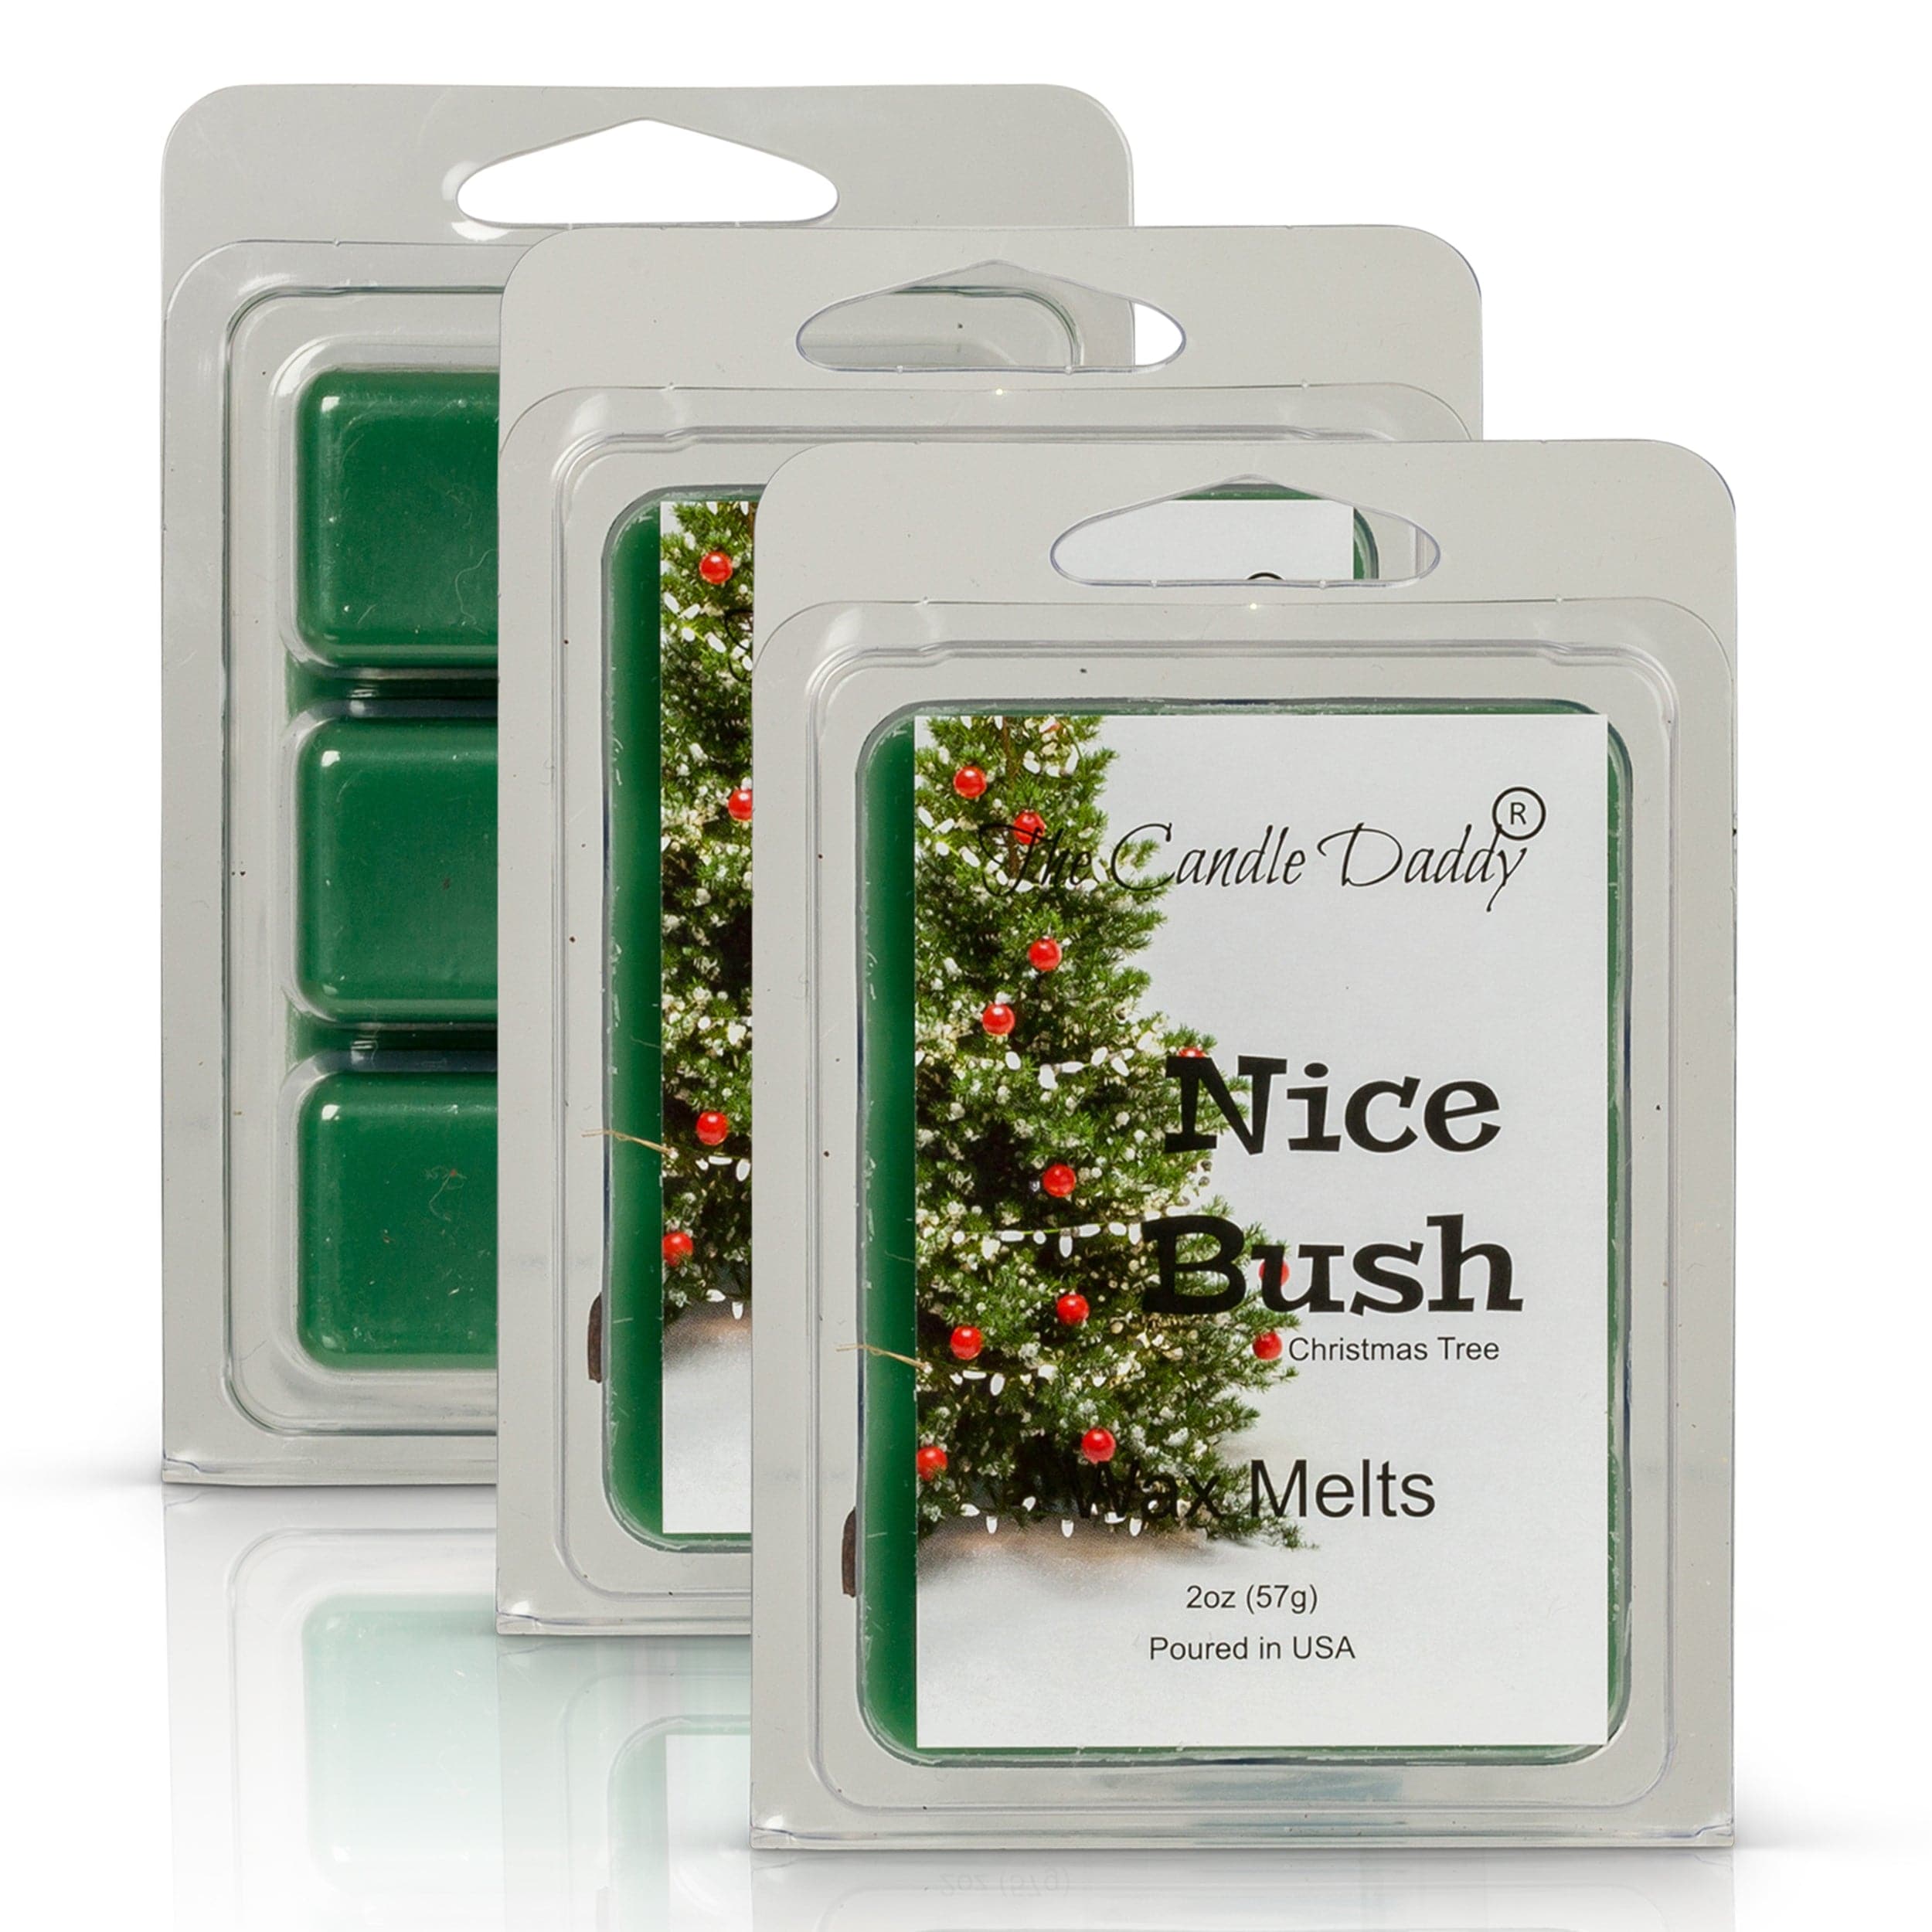 Pine Highly Scented Wax Melts Variety Pack - Bayberry Fir, Christmas Tree, Mistletoe Moments, Green